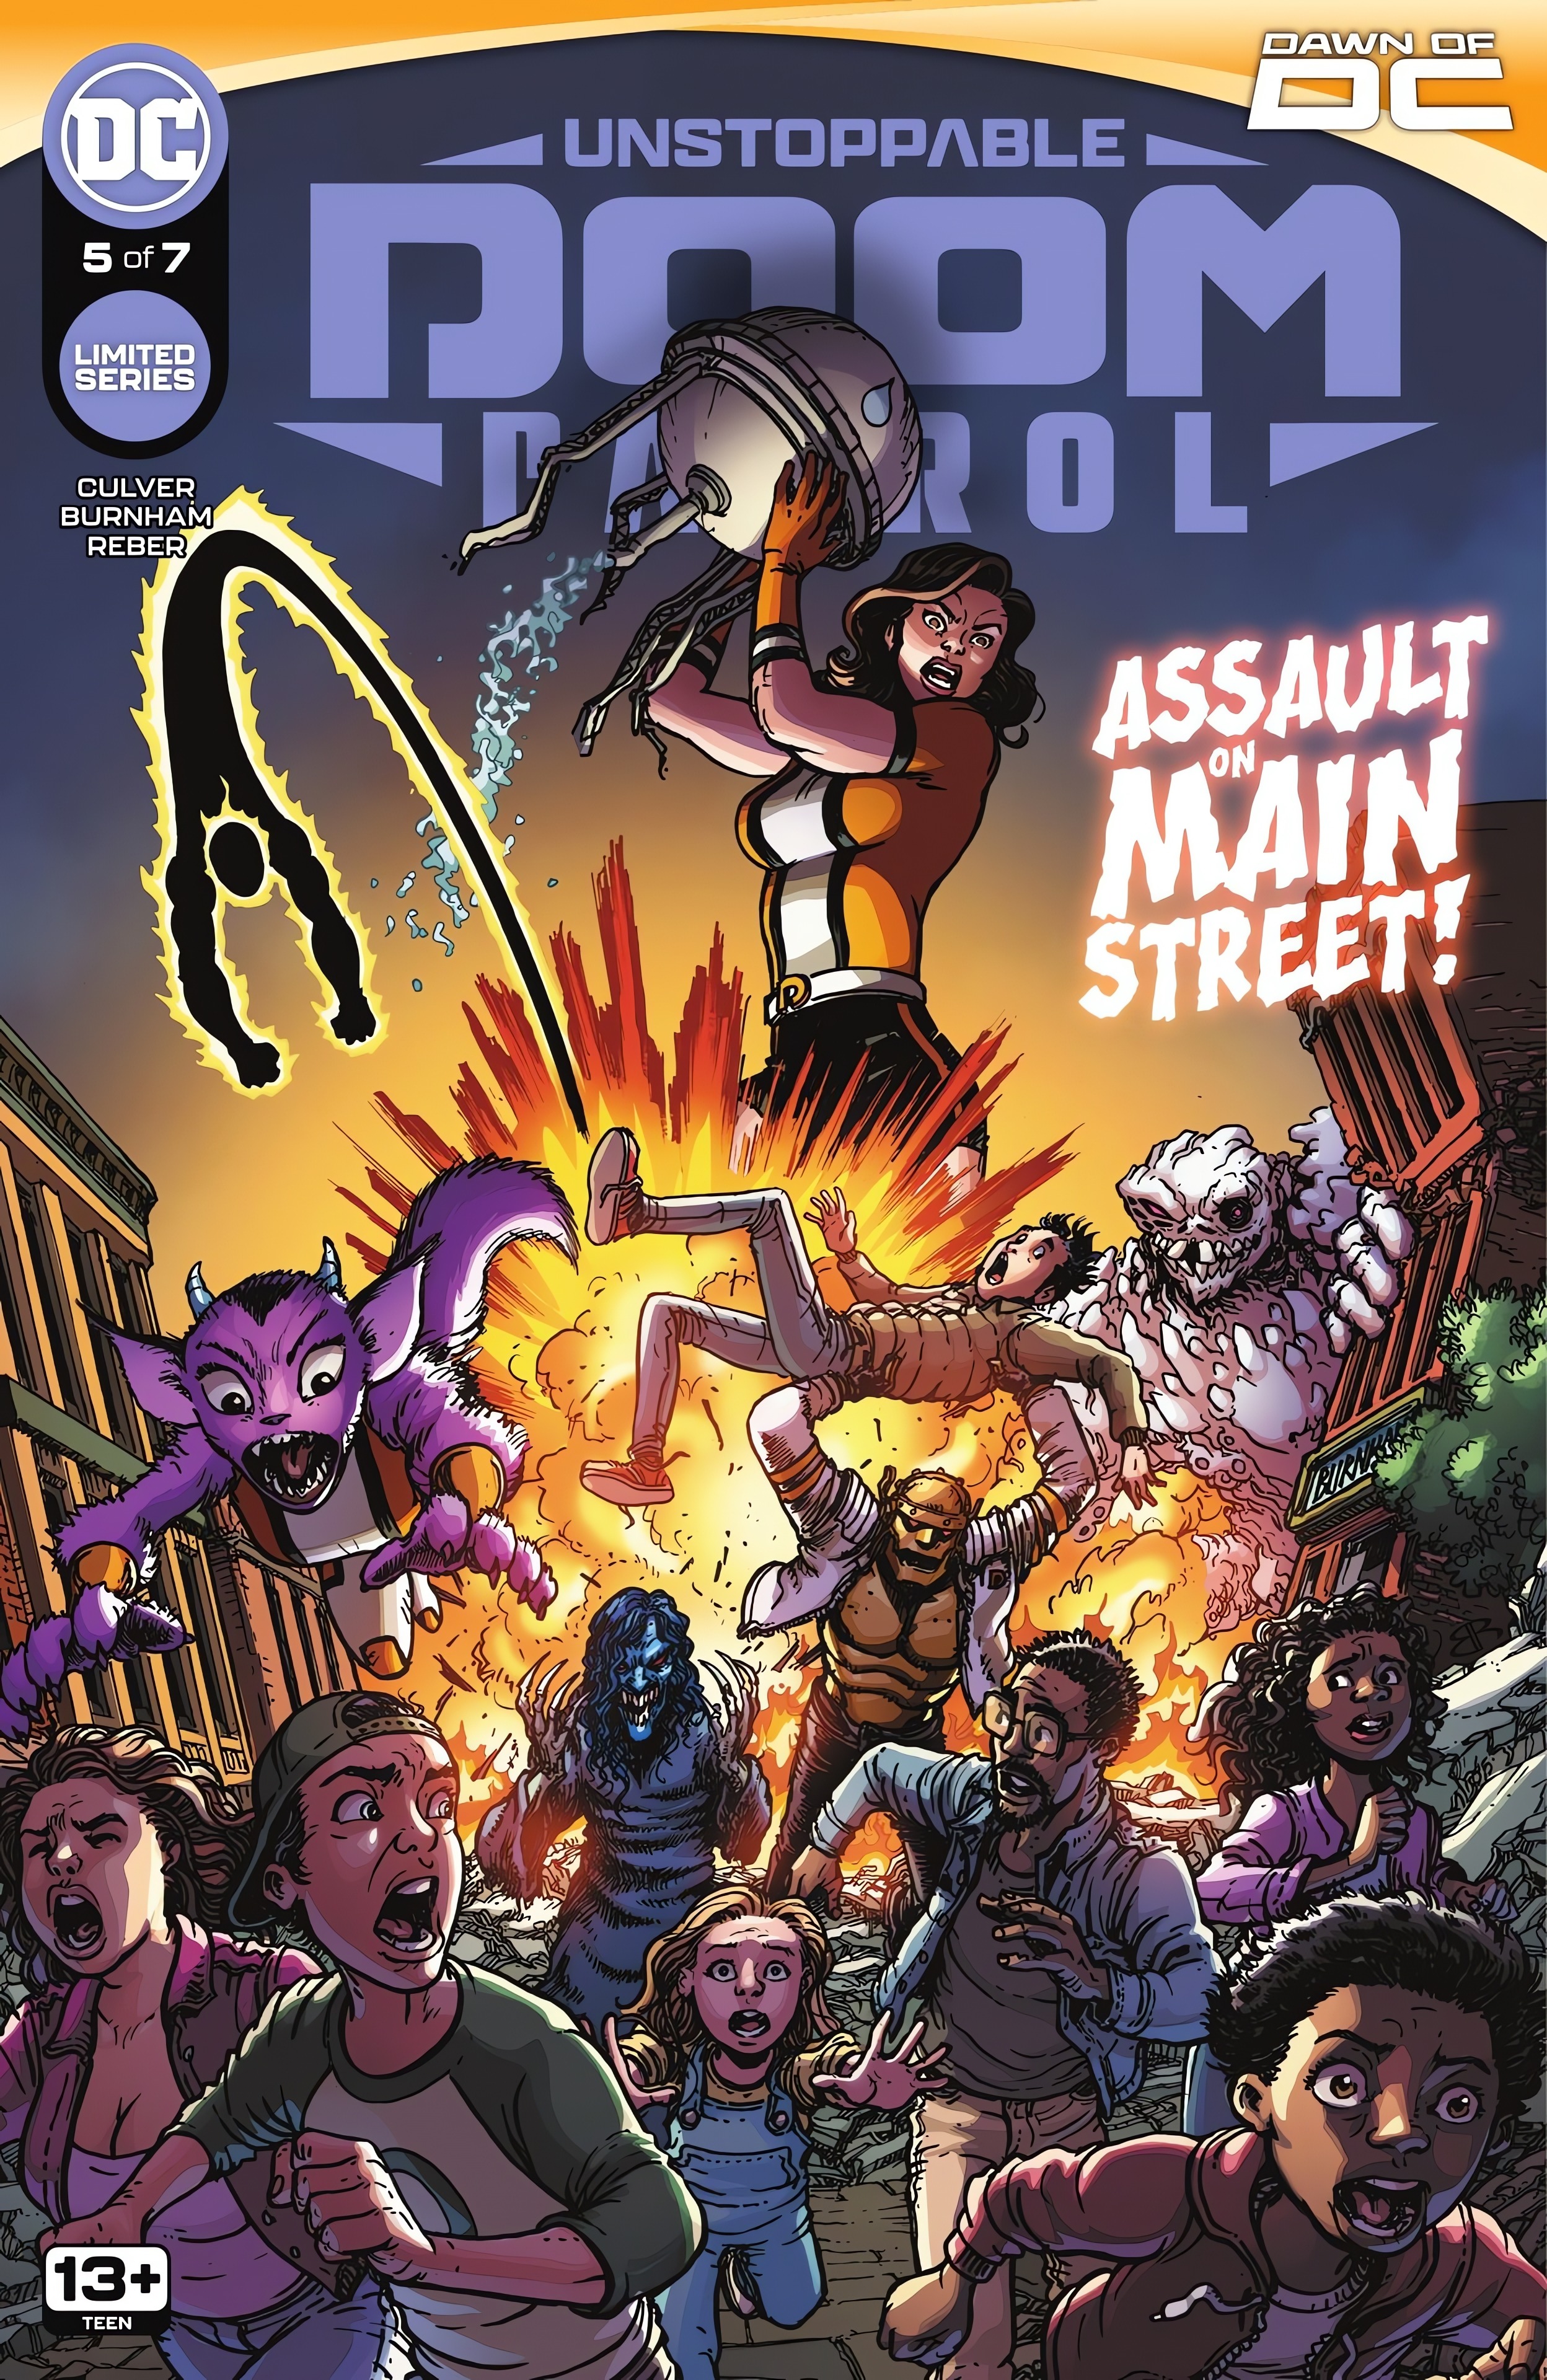 Read online Unstoppable Doom Patrol comic -  Issue #5 - 1